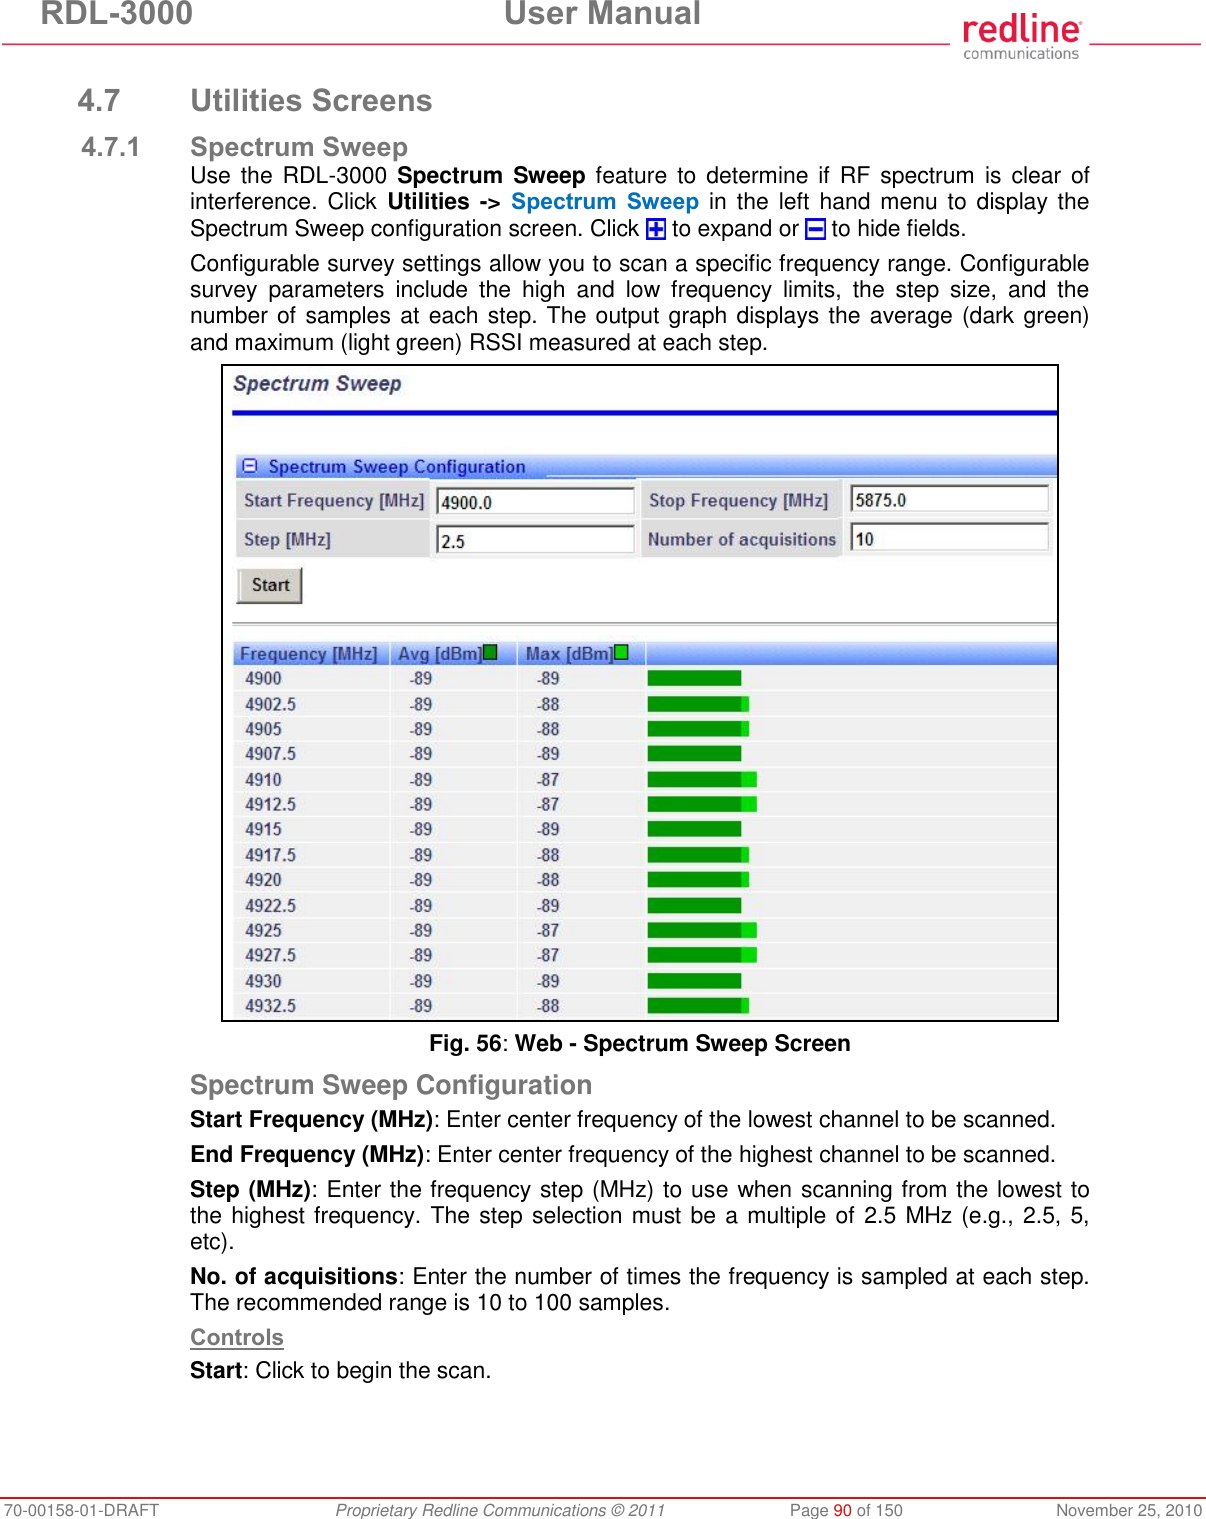 RDL-3000  User Manual 70-00158-01-DRAFT  Proprietary Redline Communications © 2011  Page 90 of 150  November 25, 2010  4.7 Utilities Screens 4.7.1 Spectrum Sweep Use the  RDL-3000  Spectrum Sweep feature  to  determine  if  RF spectrum  is  clear of interference. Click  Utilities -&gt; Spectrum  Sweep in the  left  hand menu  to  display the Spectrum Sweep configuration screen. Click   to expand or   to hide fields. Configurable survey settings allow you to scan a specific frequency range. Configurable survey  parameters  include  the  high  and  low  frequency  limits,  the  step  size,  and  the number of samples at each step. The output graph displays the average (dark green) and maximum (light green) RSSI measured at each step.  Fig. 56: Web - Spectrum Sweep Screen  Spectrum Sweep Configuration Start Frequency (MHz): Enter center frequency of the lowest channel to be scanned. End Frequency (MHz): Enter center frequency of the highest channel to be scanned.  Step (MHz): Enter the frequency step (MHz) to use when scanning from the lowest to the highest frequency. The step selection must be a multiple of 2.5 MHz (e.g., 2.5, 5, etc). No. of acquisitions: Enter the number of times the frequency is sampled at each step. The recommended range is 10 to 100 samples.  Controls Start: Click to begin the scan. 